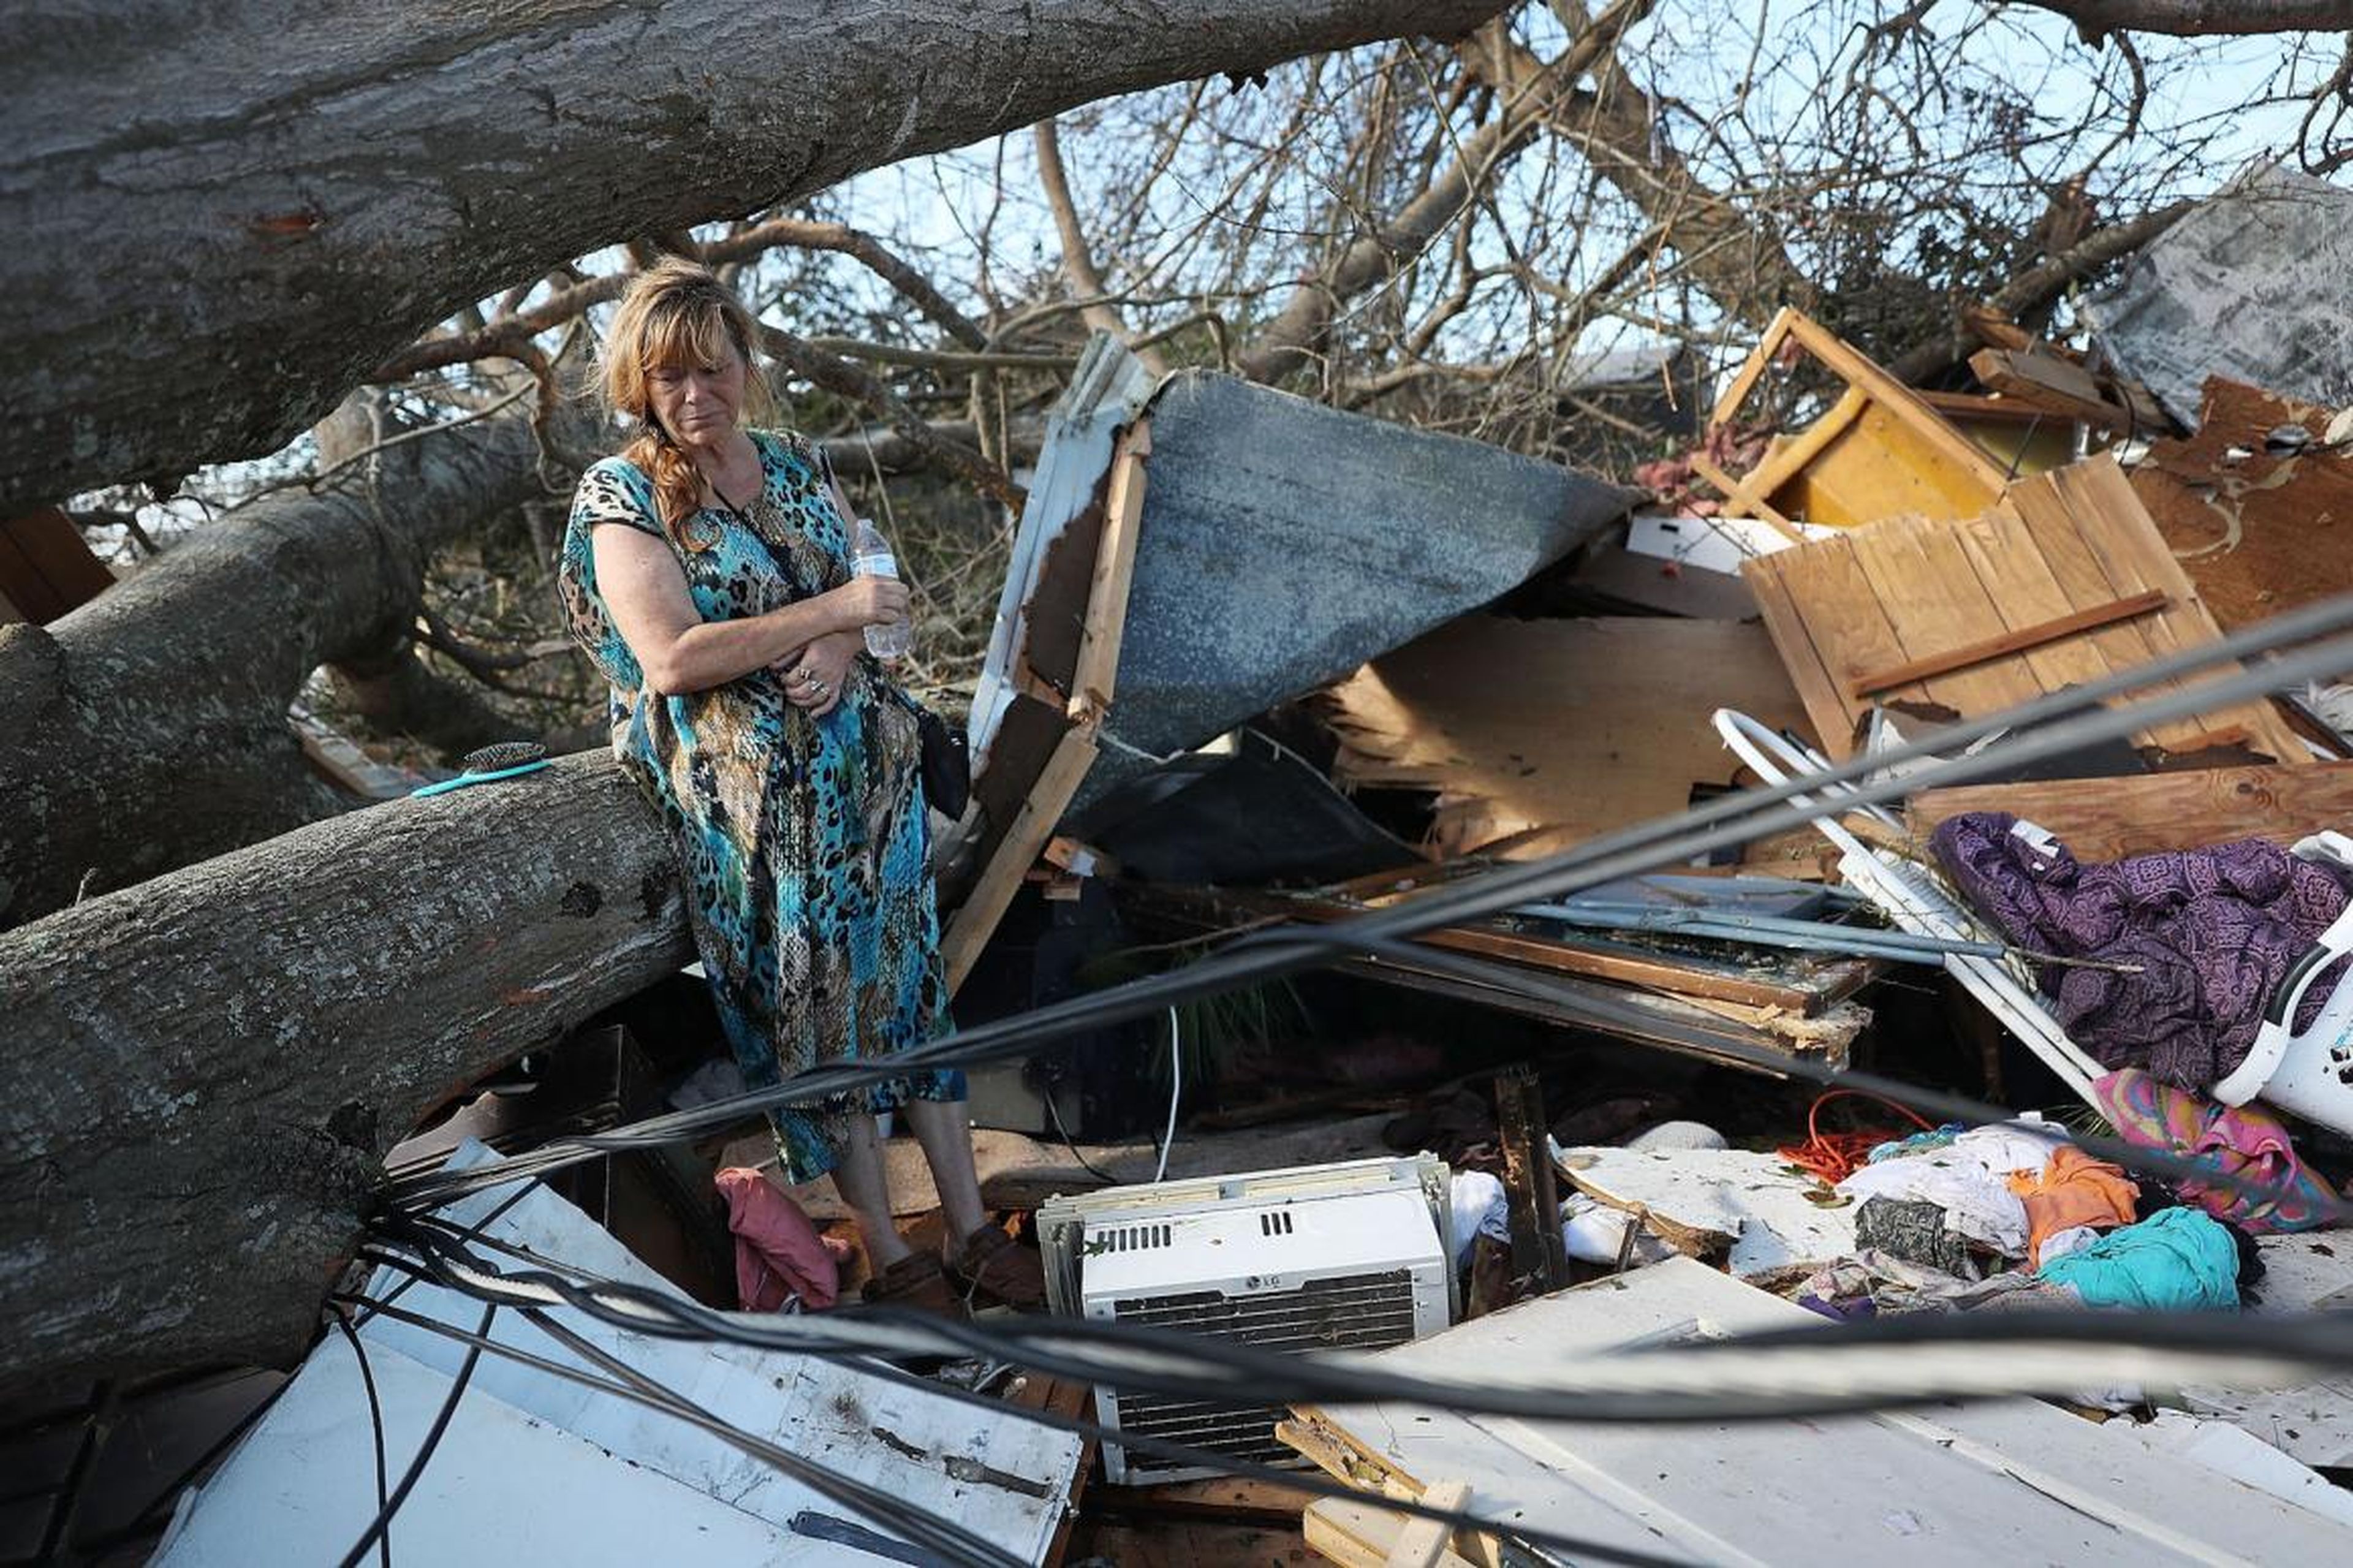 Mexico Beach, a small seaside town, was one of the hardest-hit areas. About 285 of the town's roughly 1,000 residents stayed behind during the hurricane.